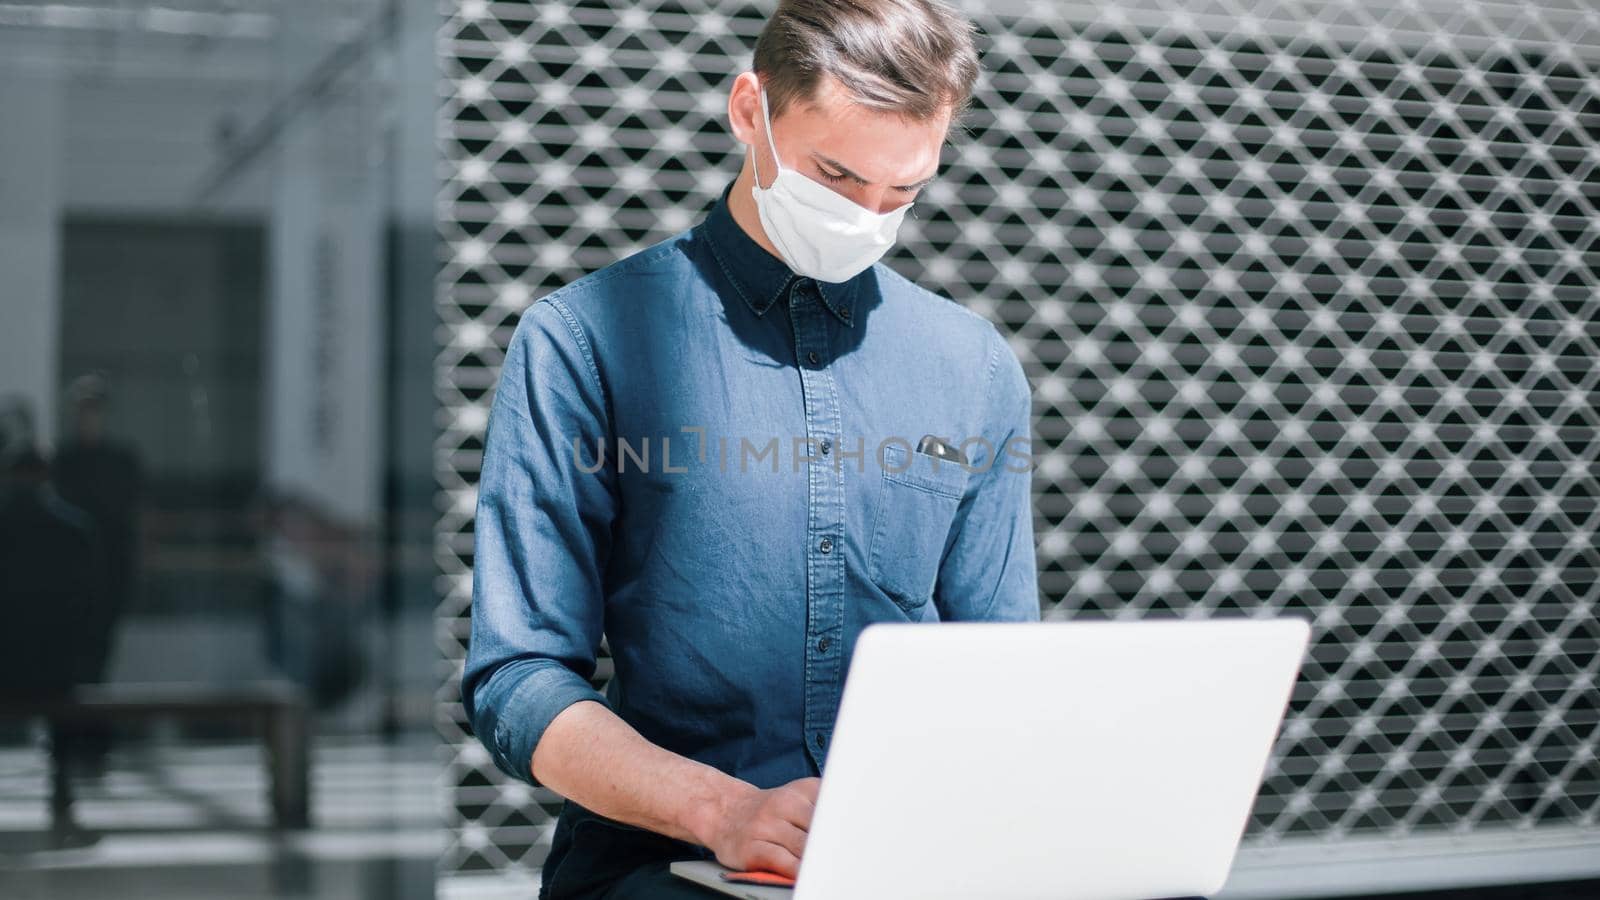 man in a protective mask spraying a bactericidal spray on the surface of a laptop. by SmartPhotoLab